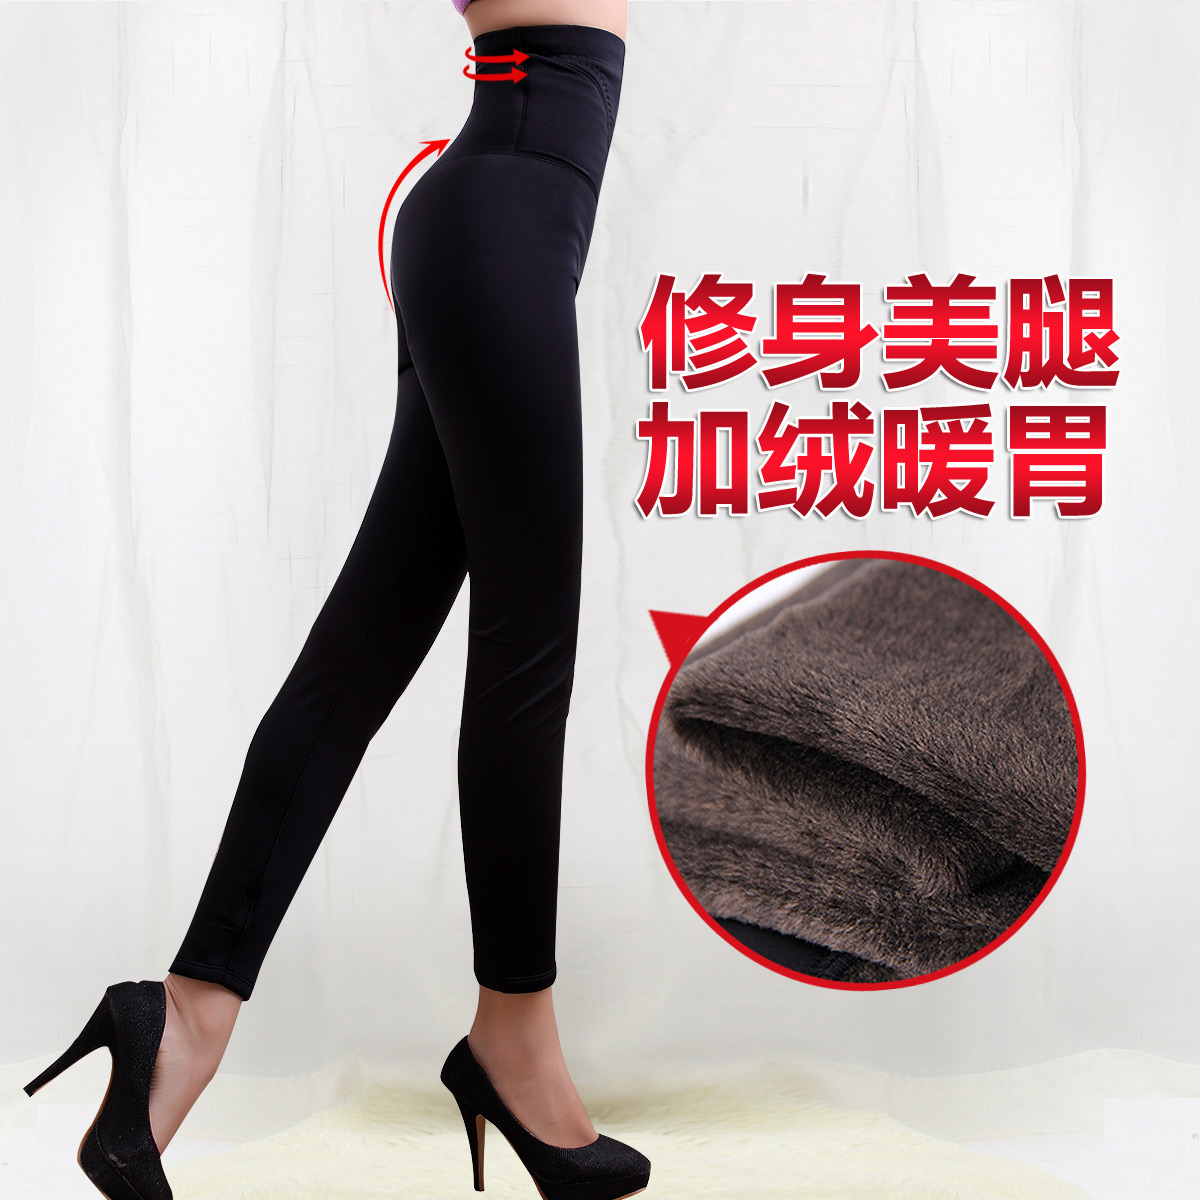 Winter ultra high waist double layer plus velvet thickening warm pants solid color legging long johns sk87